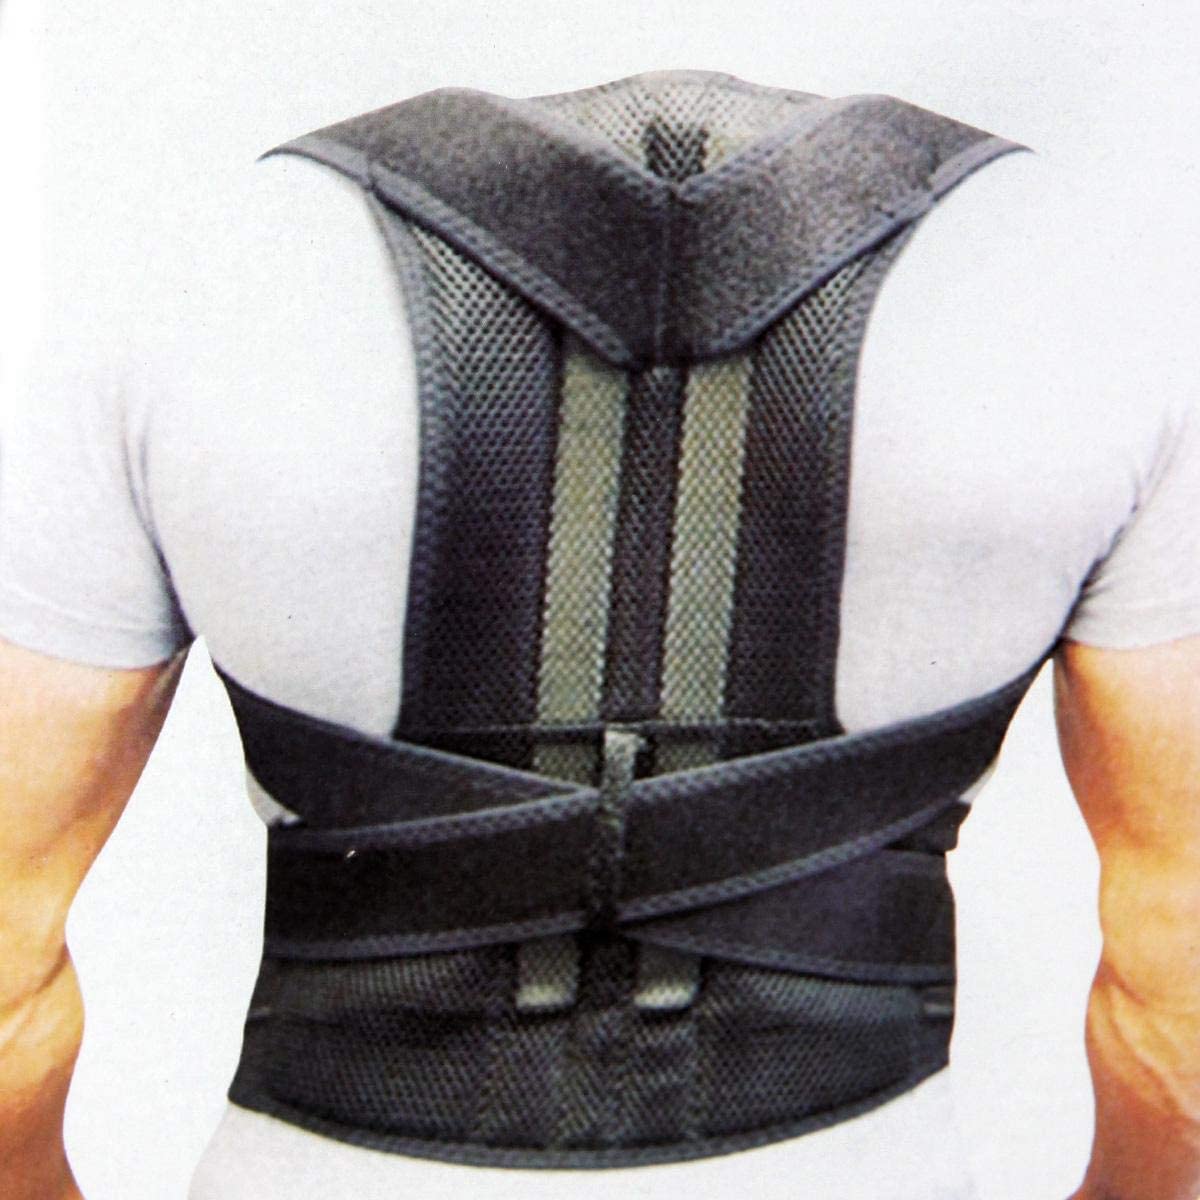 Magnetic corset belt and supportive for the back and dilute back pain